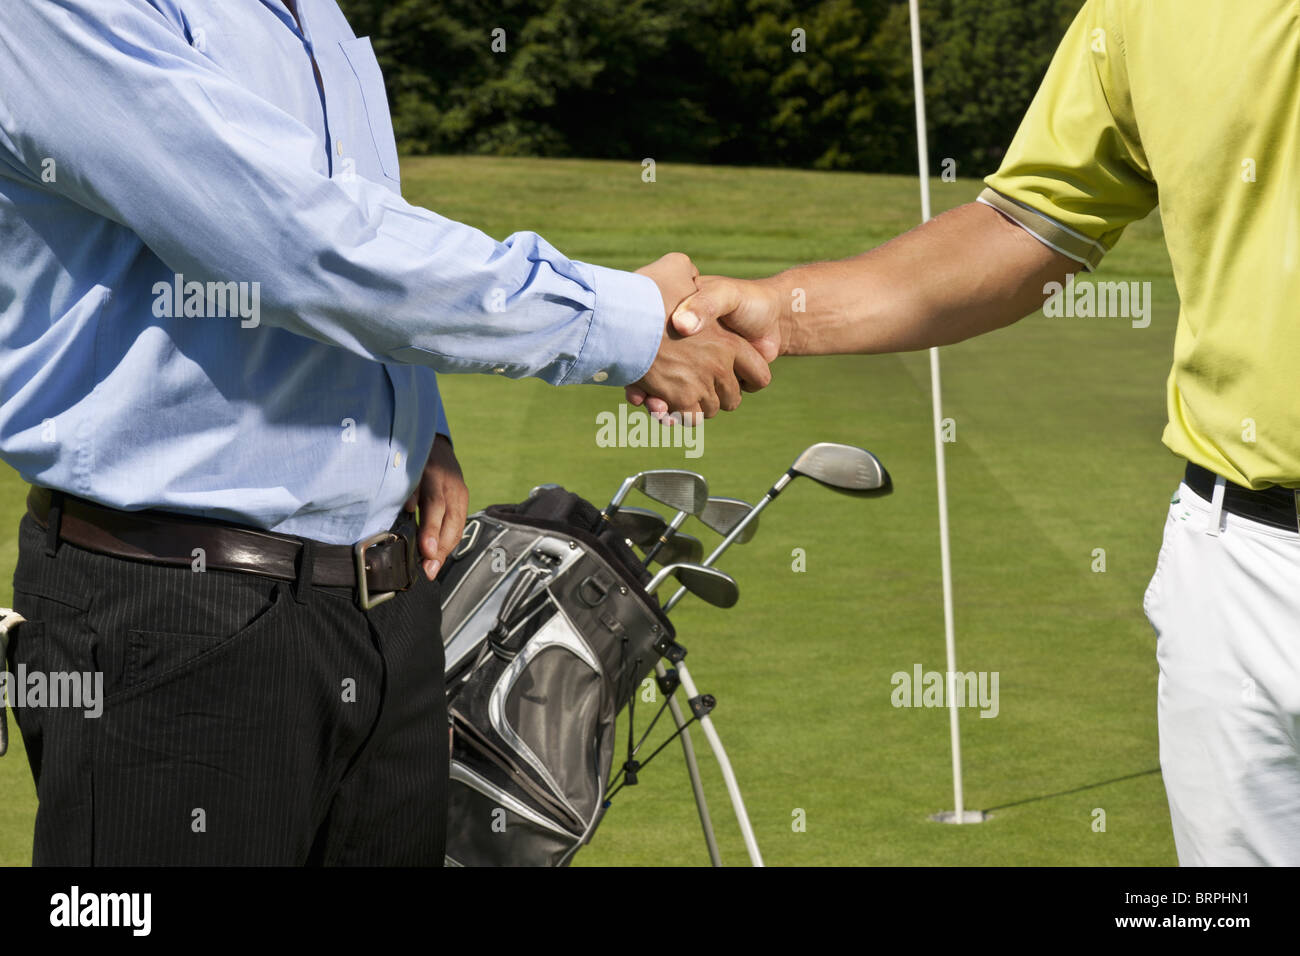 Golfer and caddy shaking hands Stock Photo